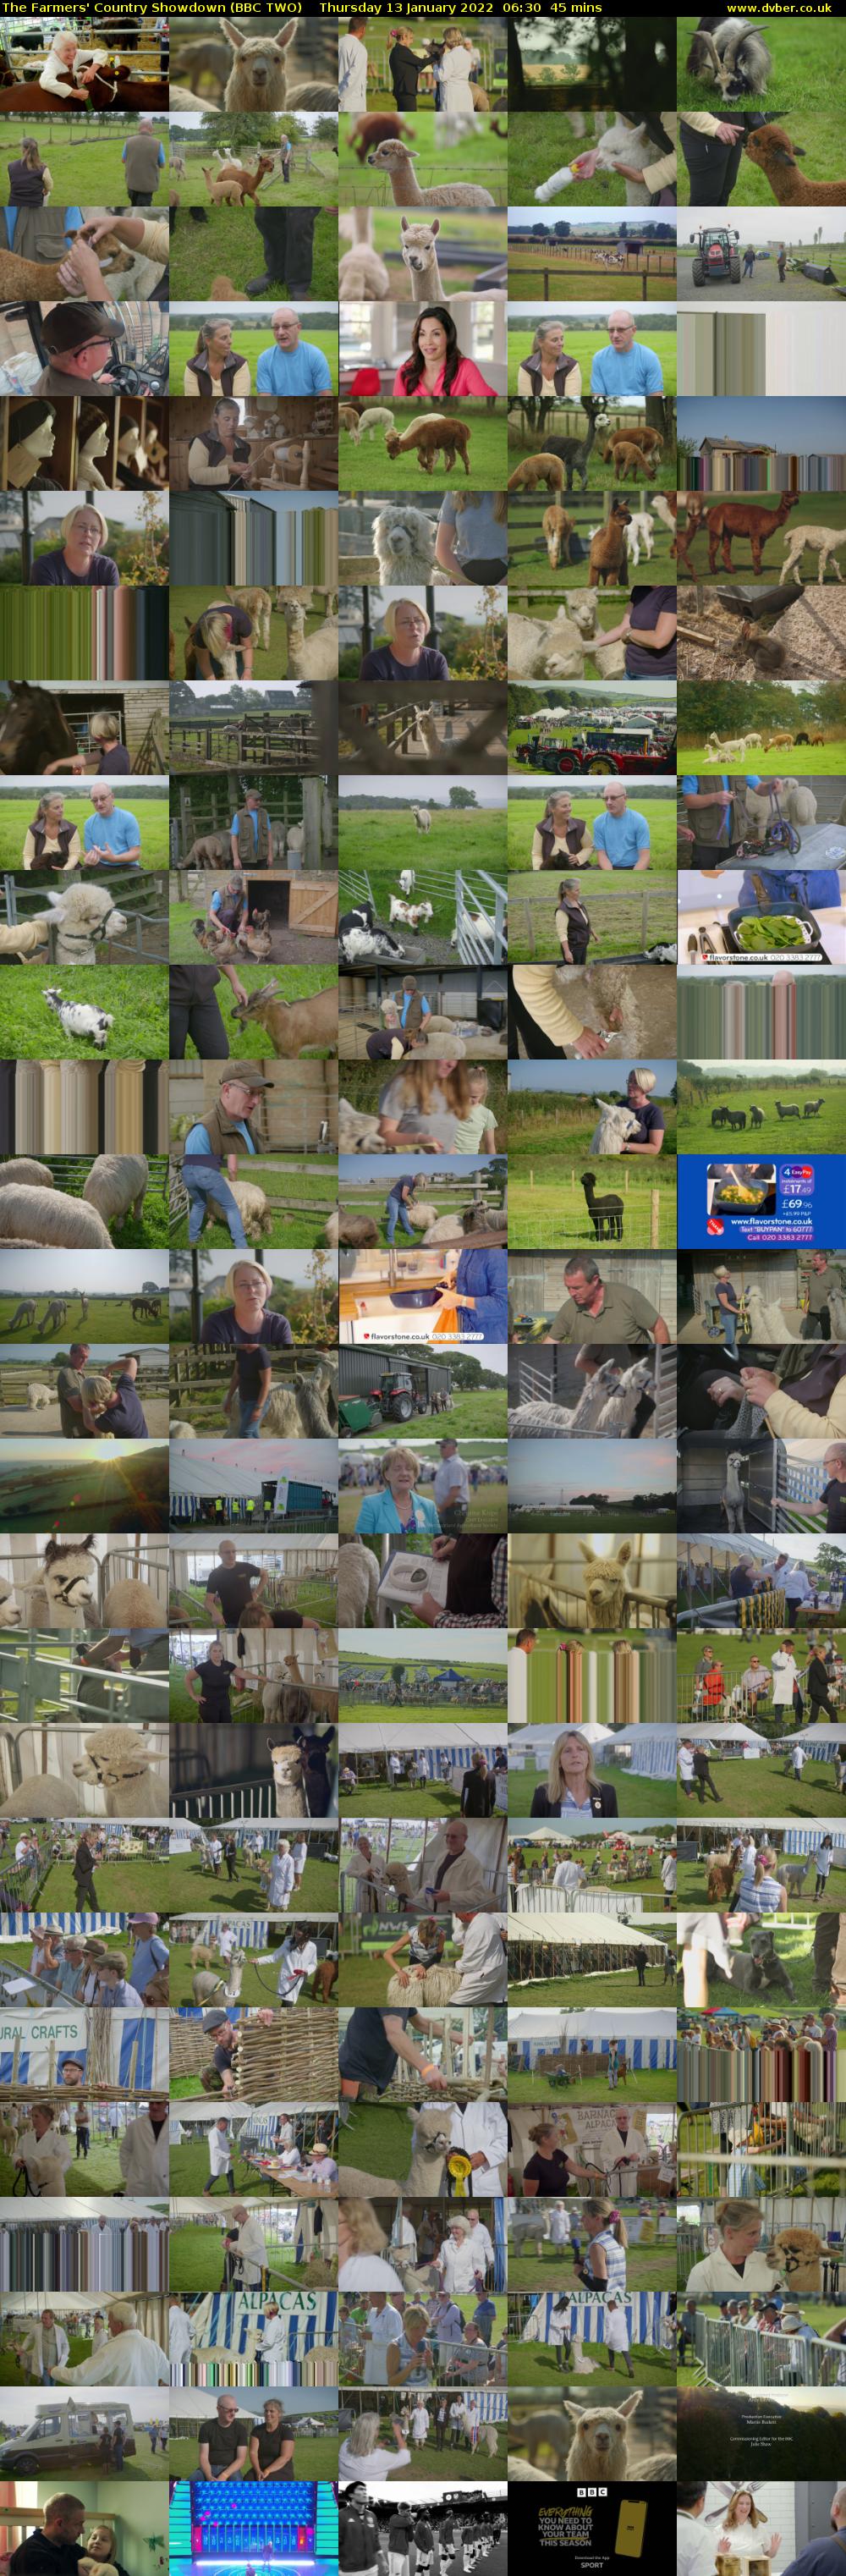 The Farmers' Country Showdown (BBC TWO) Thursday 13 January 2022 06:30 - 07:15